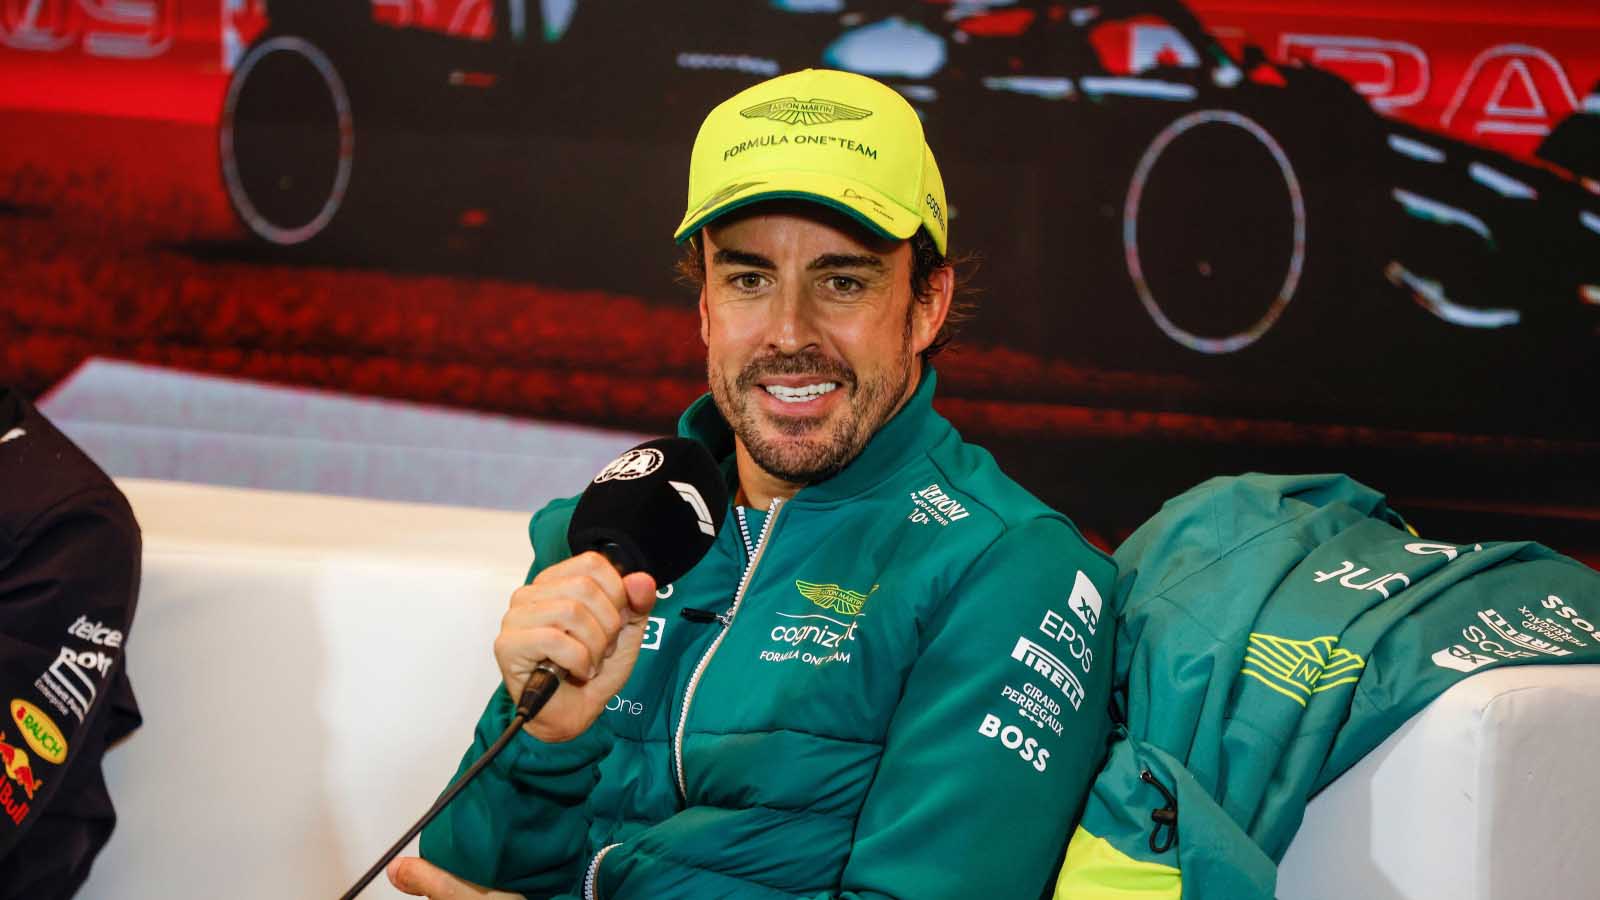 Fernando Alonso set to reach incredible career milestone at